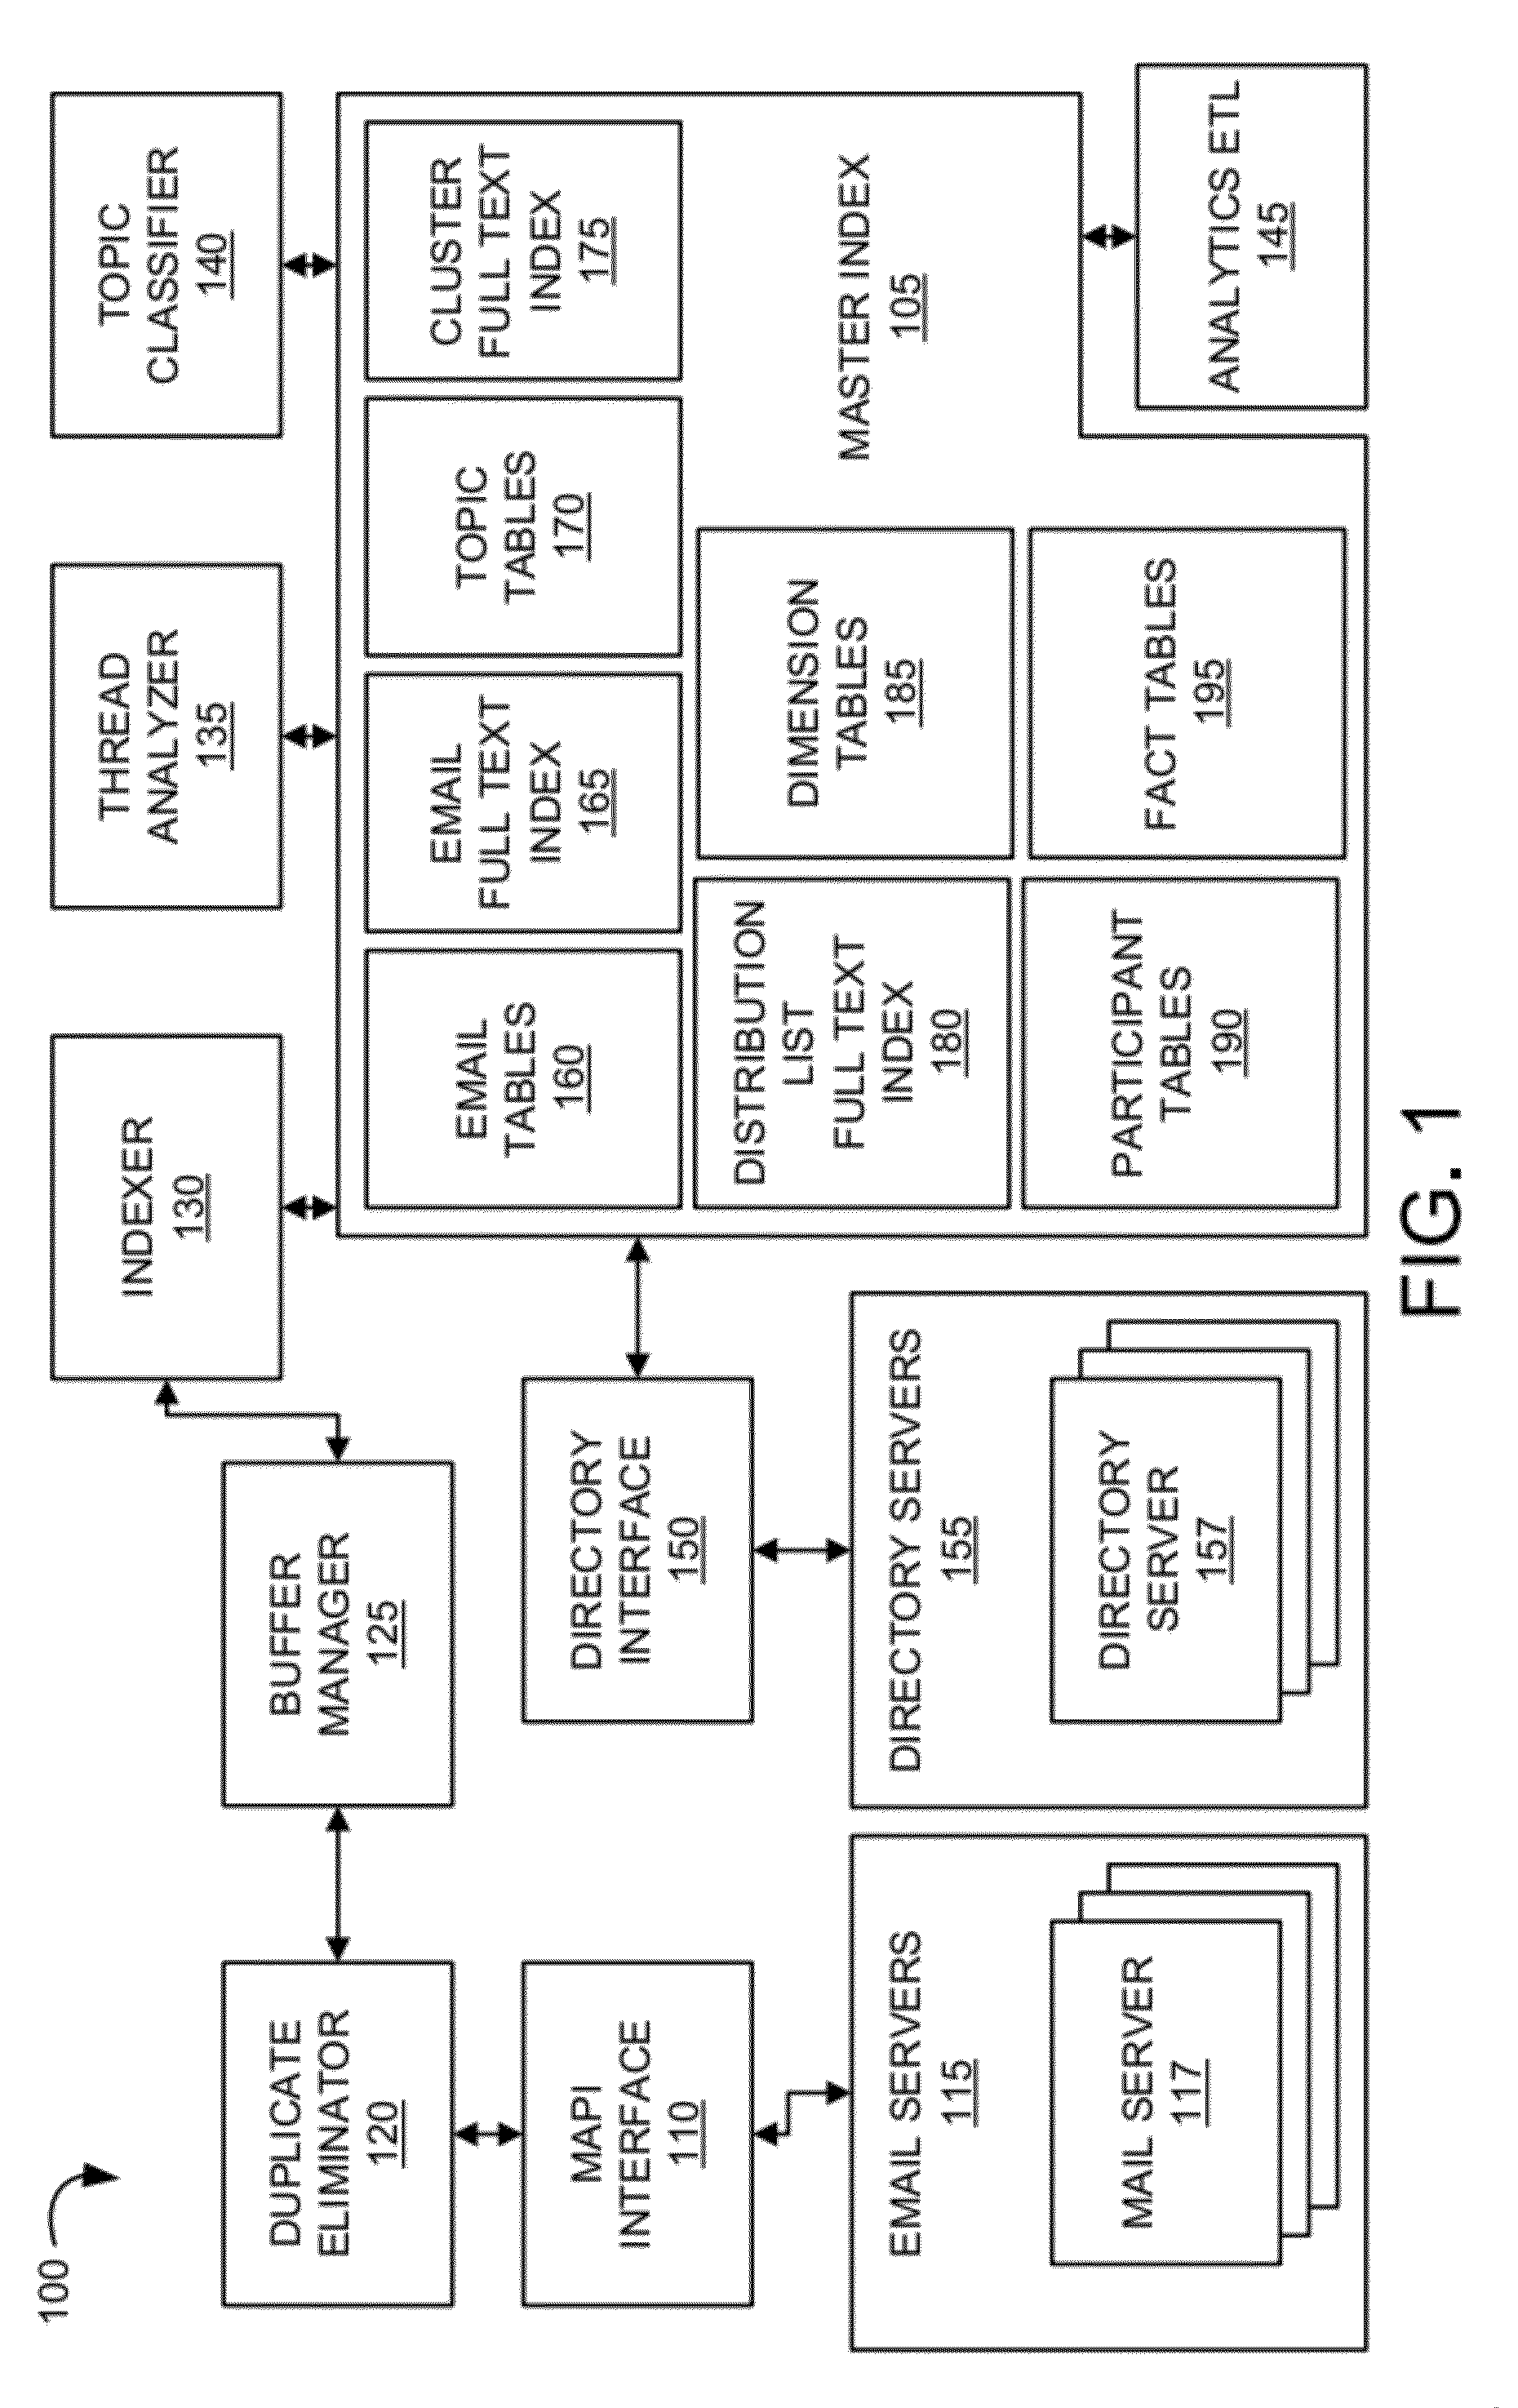 Methods and systems for automatic evaluation of electronic discovery review and productions